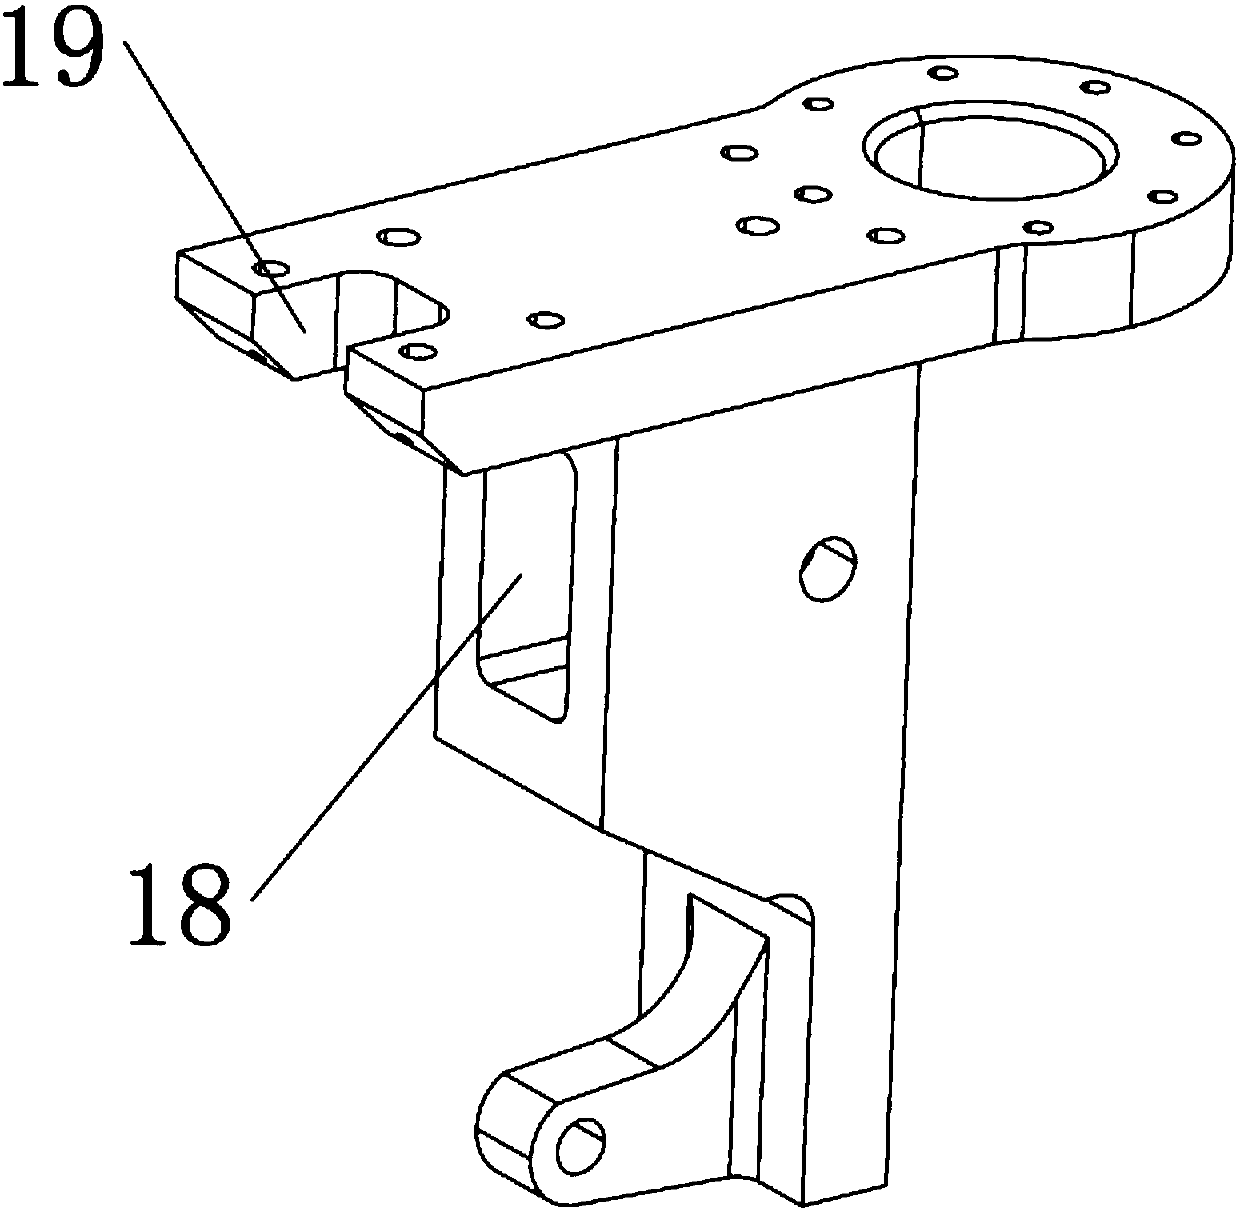 Multi-connecting-rod pressing device